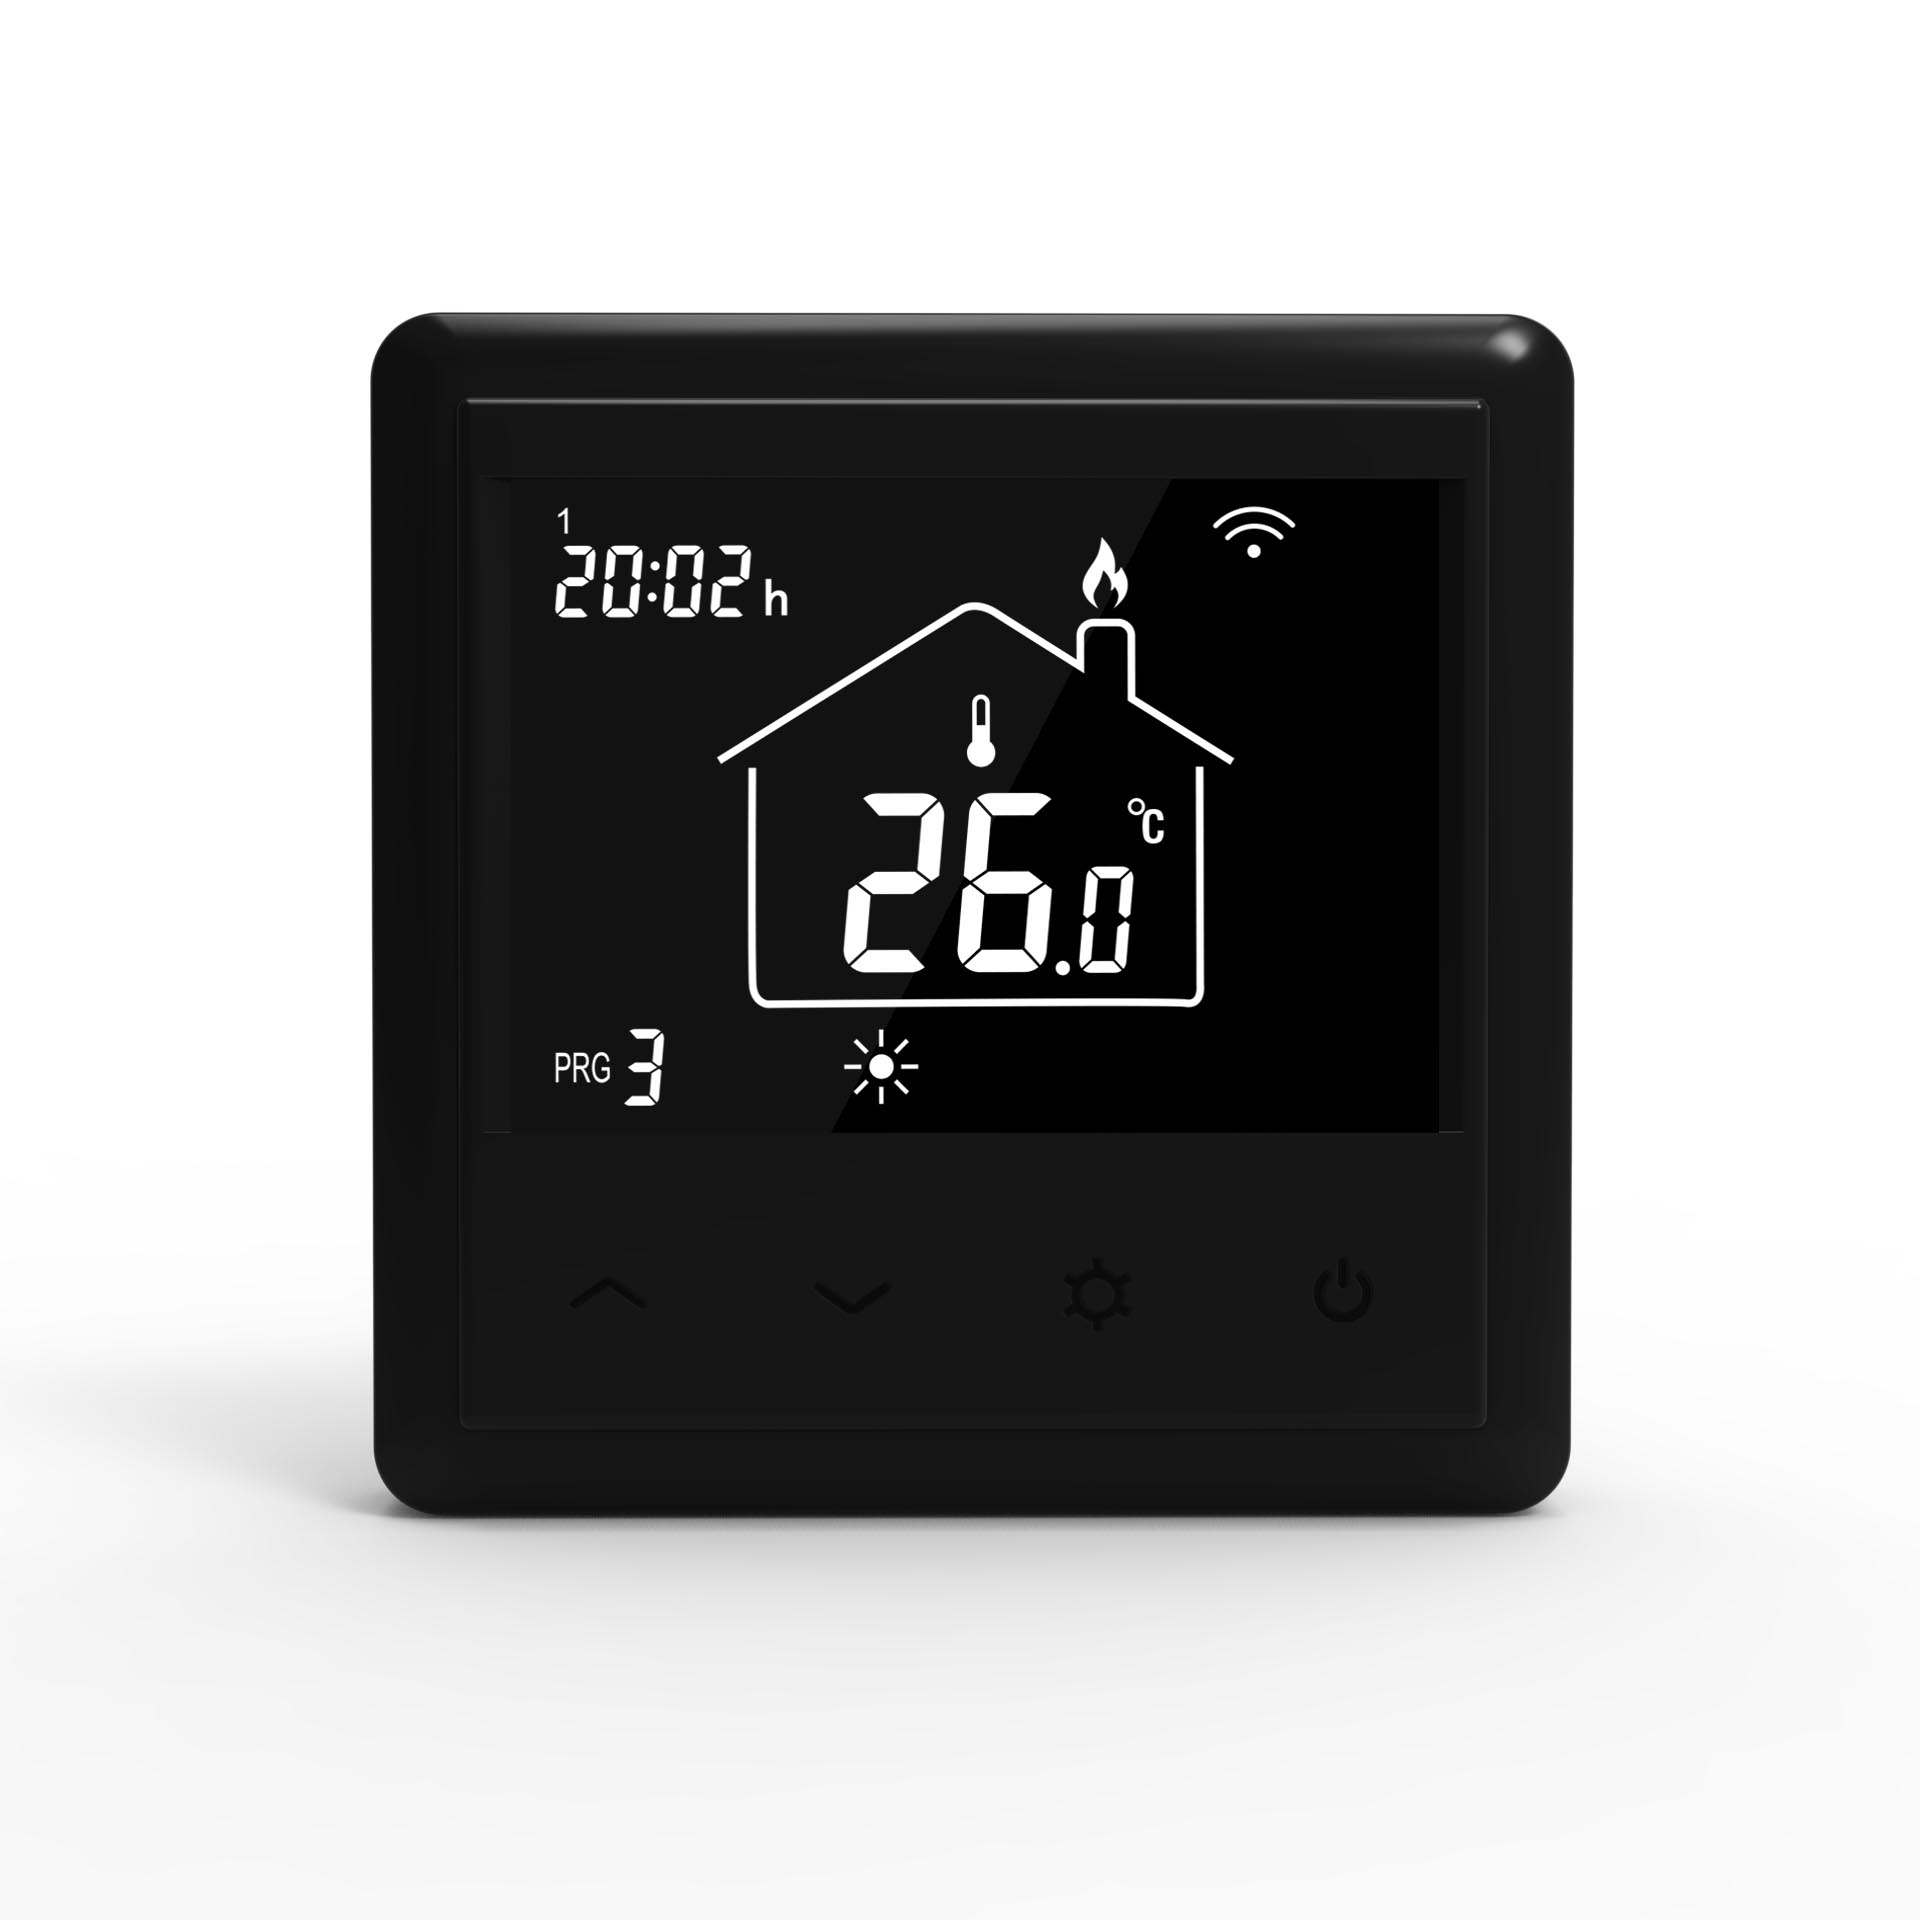 Negative LCD Screen thermostat